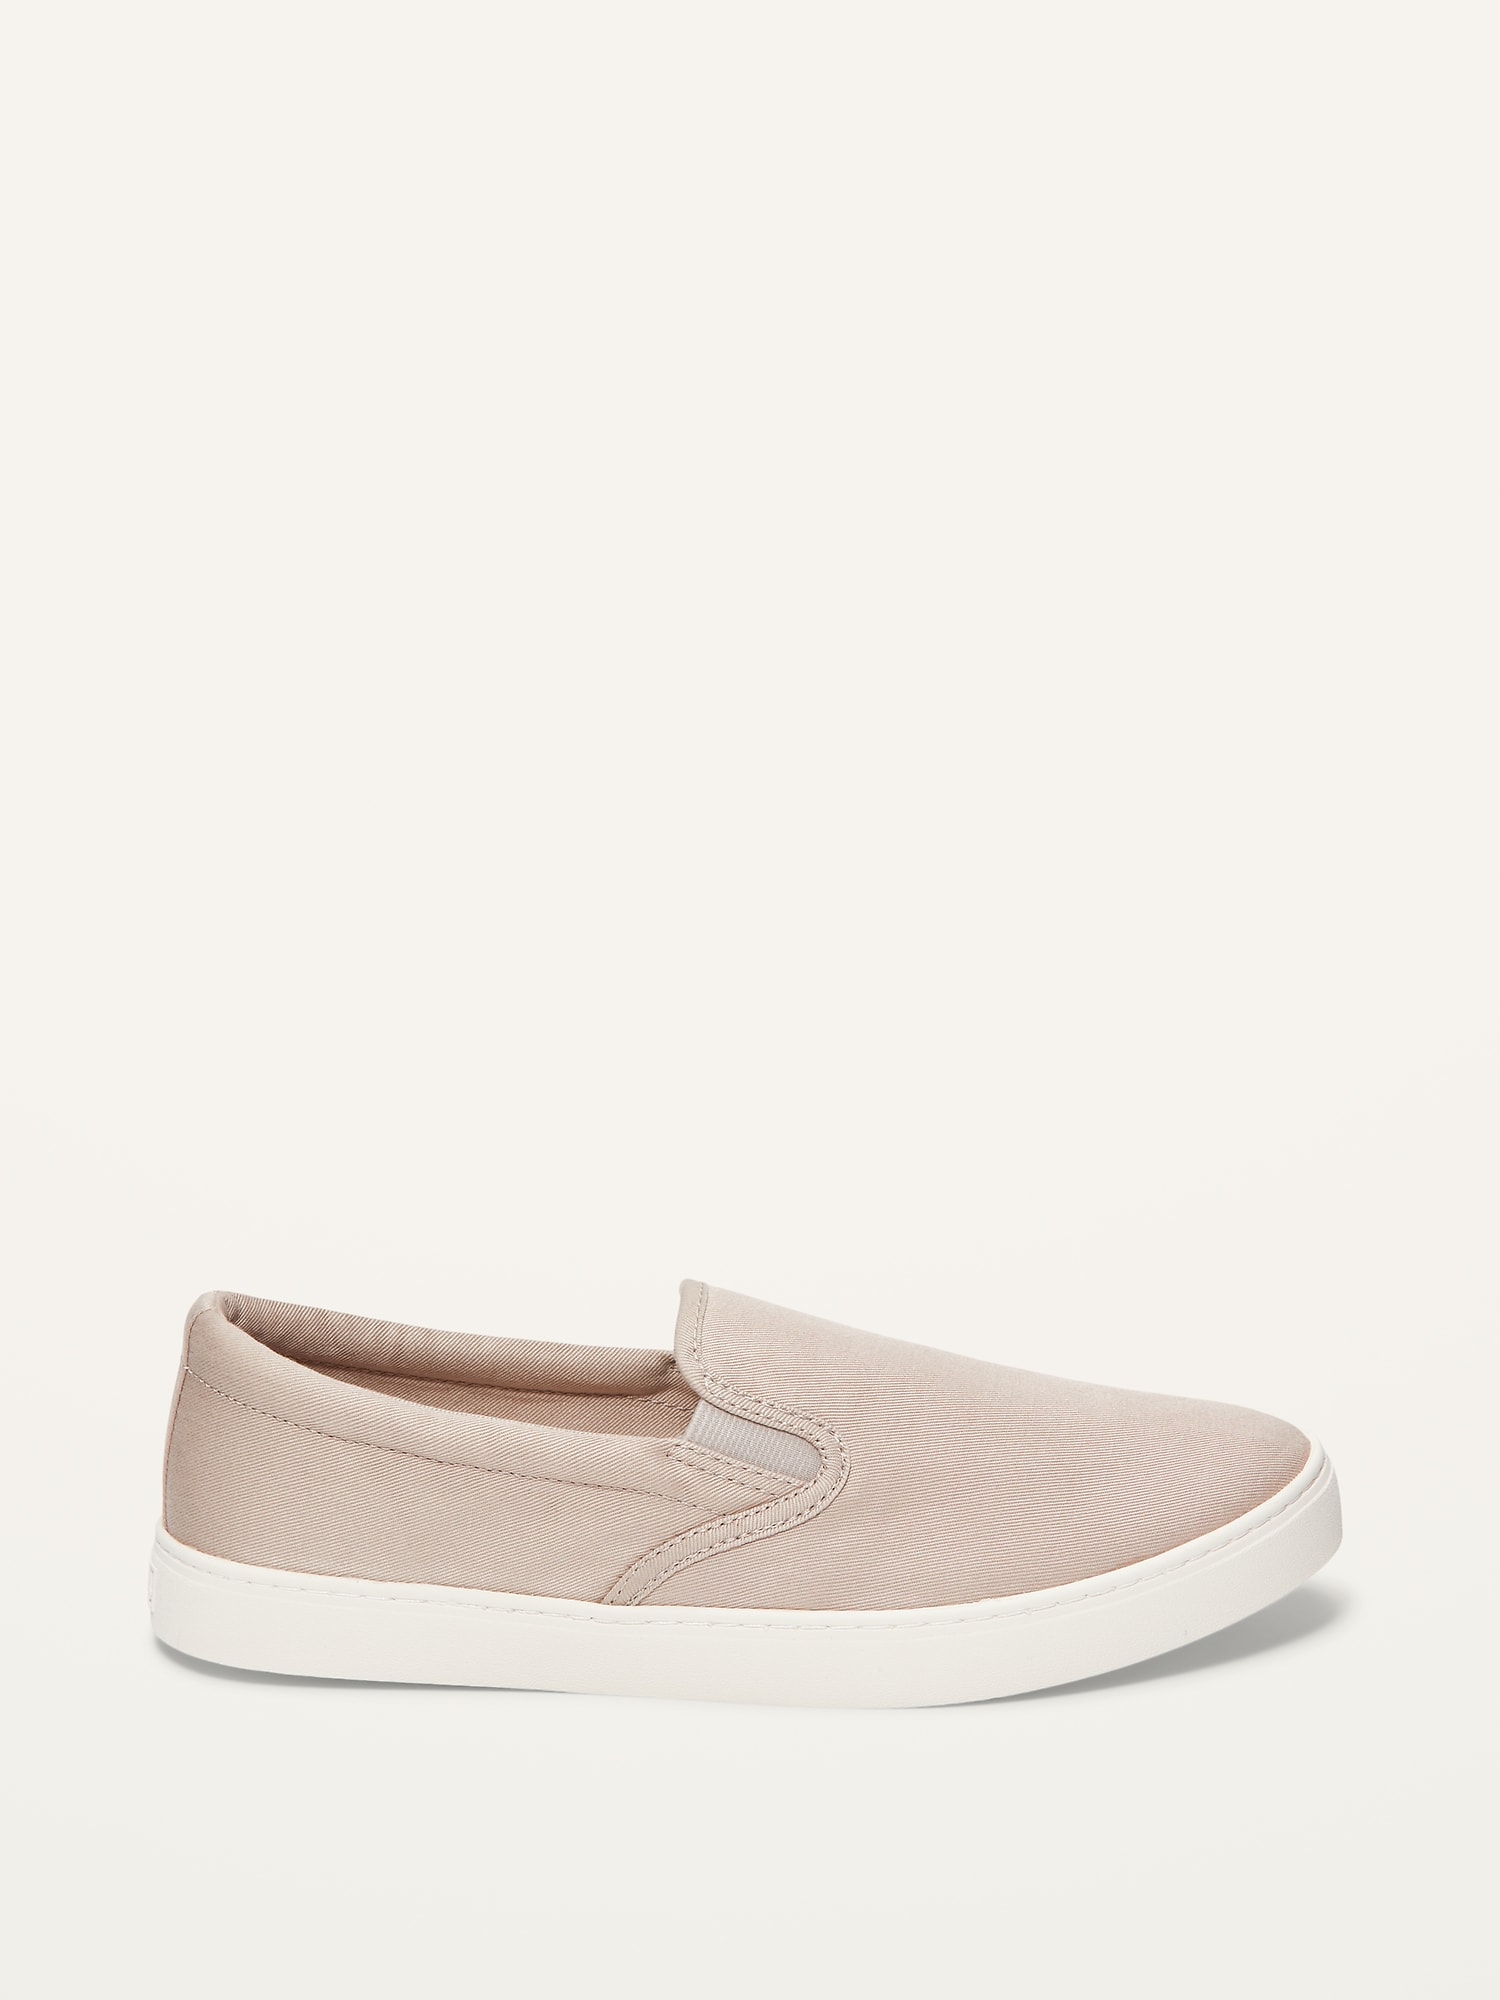 Old Navy Women's Canvas Slip-On Sneakers - White - Size 7